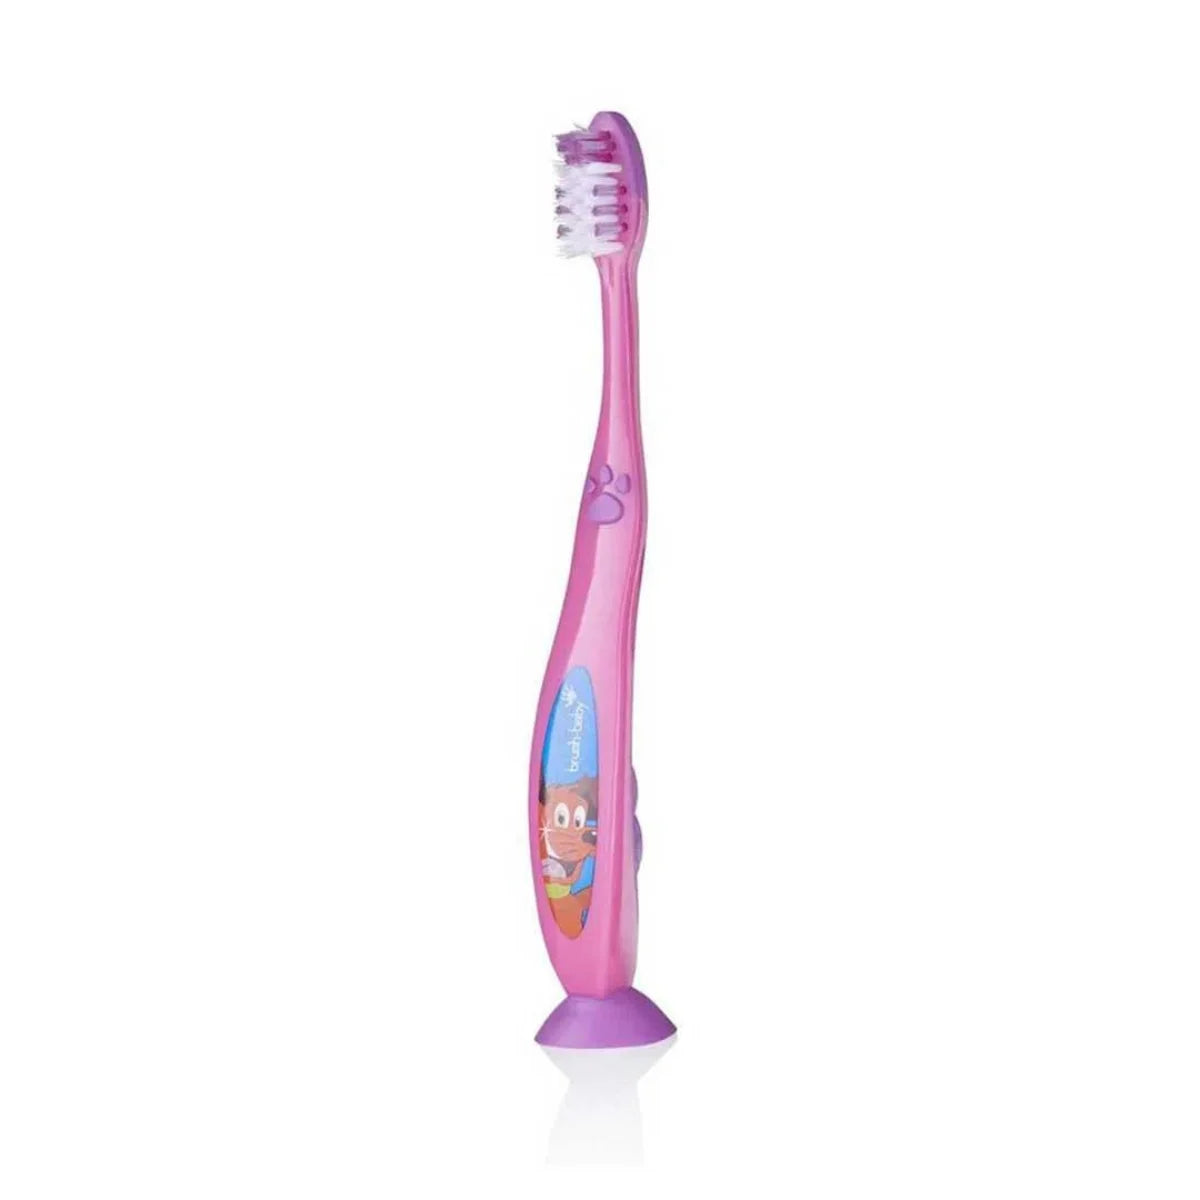 pink flossbrush bristles toothbrush for children with sucker feet for 6+ year olds